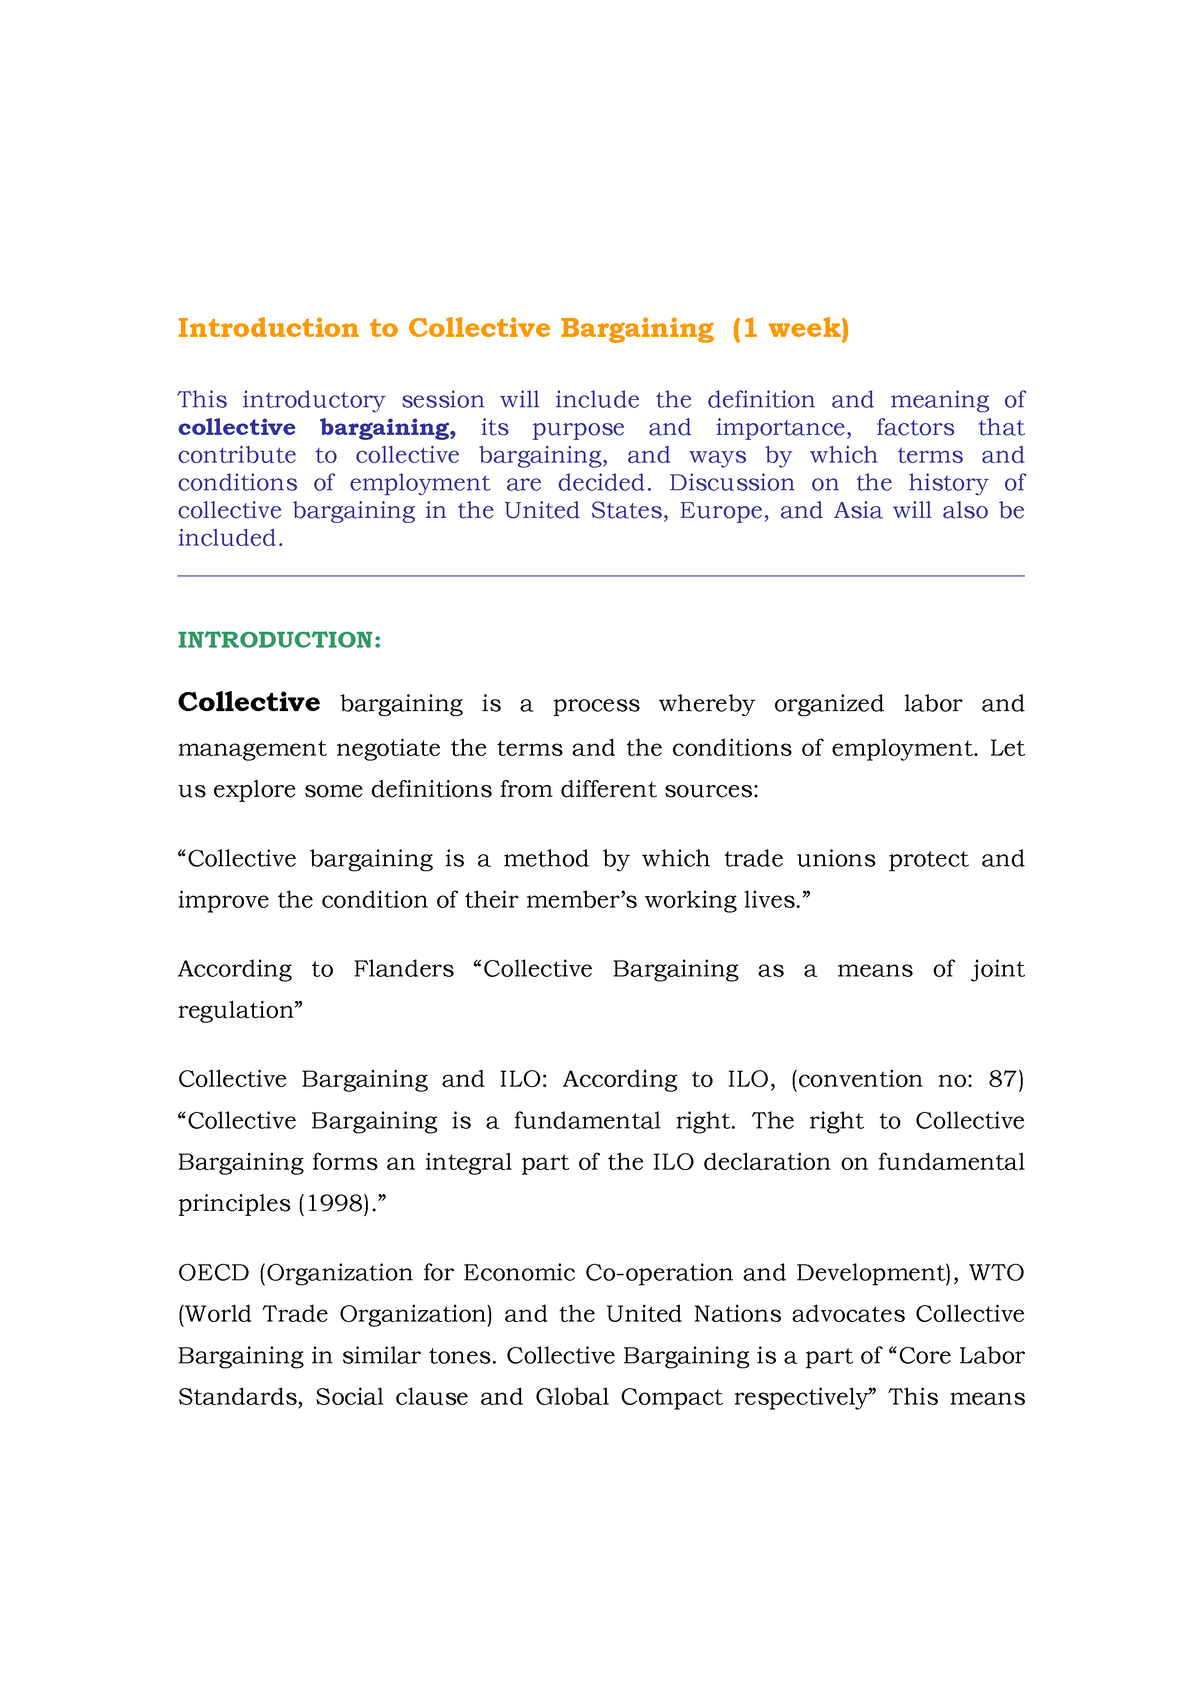 01 - Introduction to Collective Bargaining - Discussion on the history ...